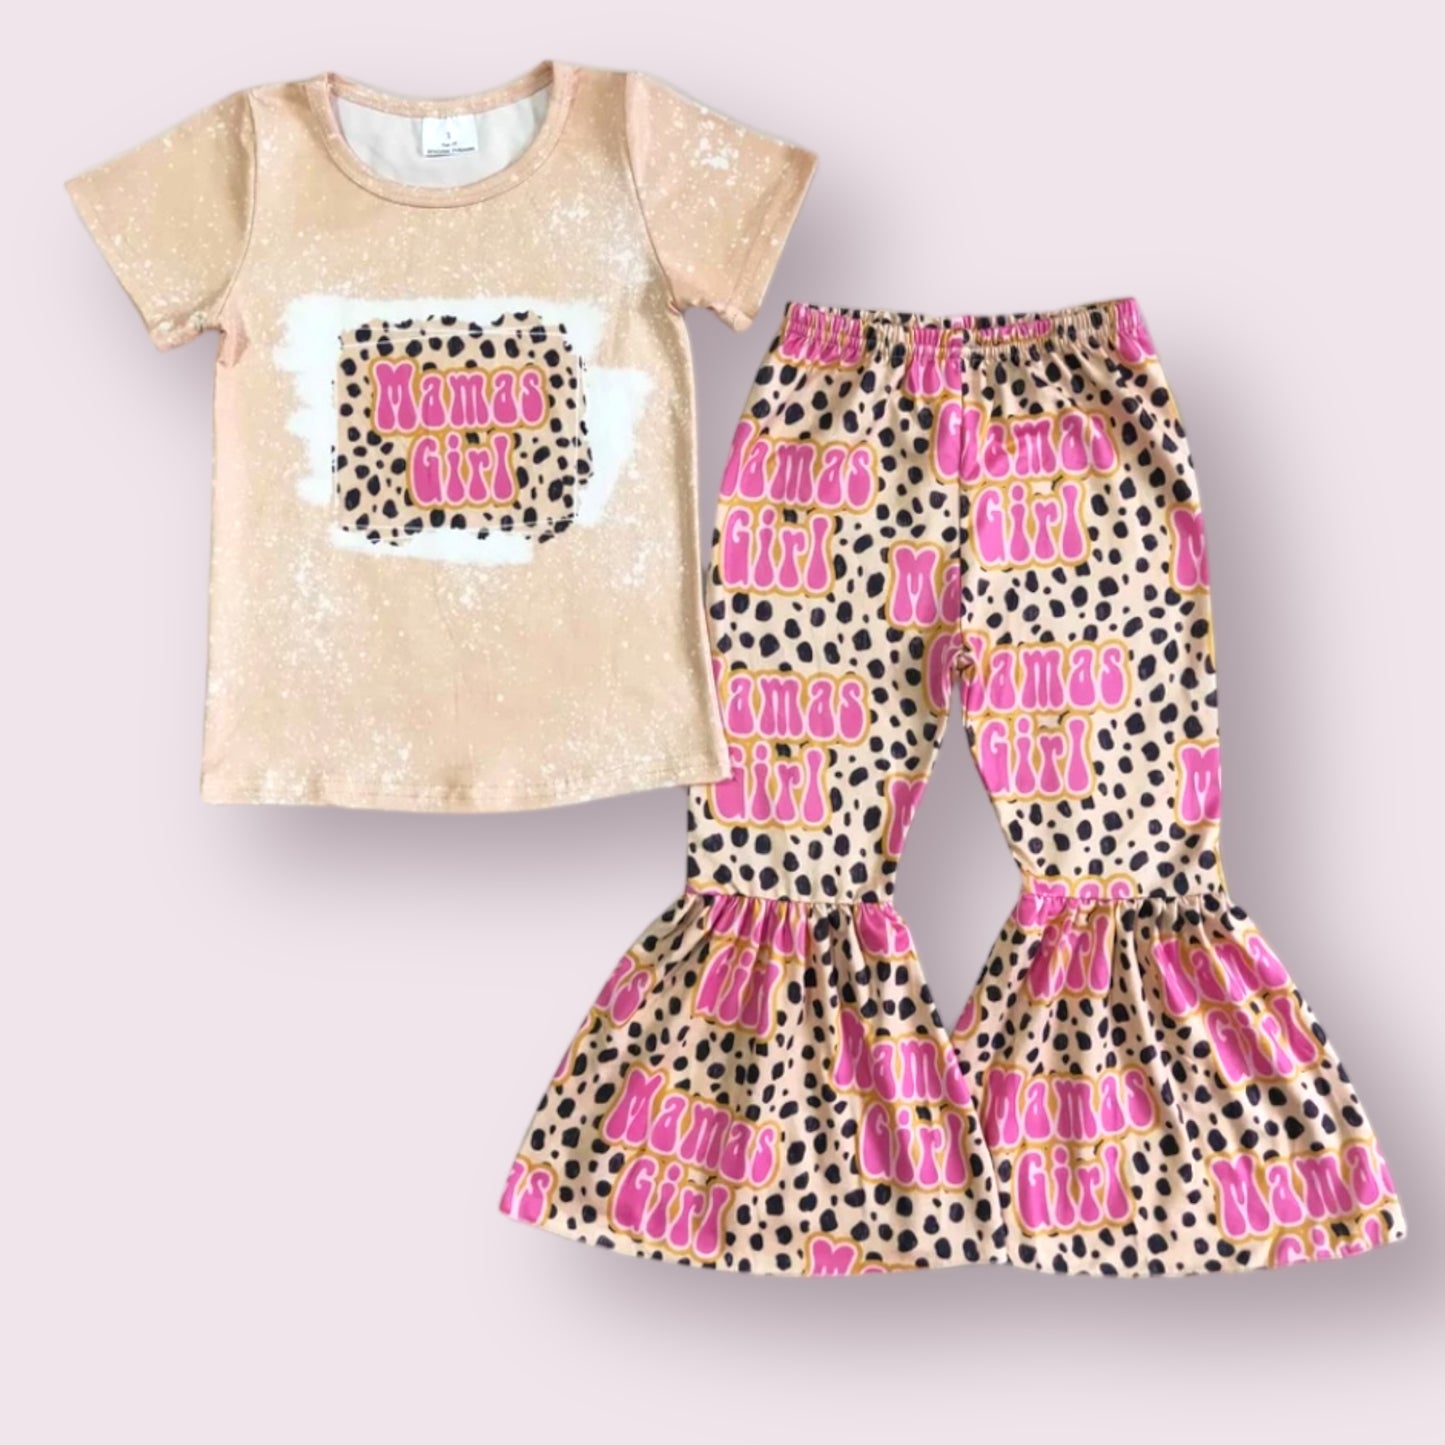 Mama Girl Bell Pants Outfit Set